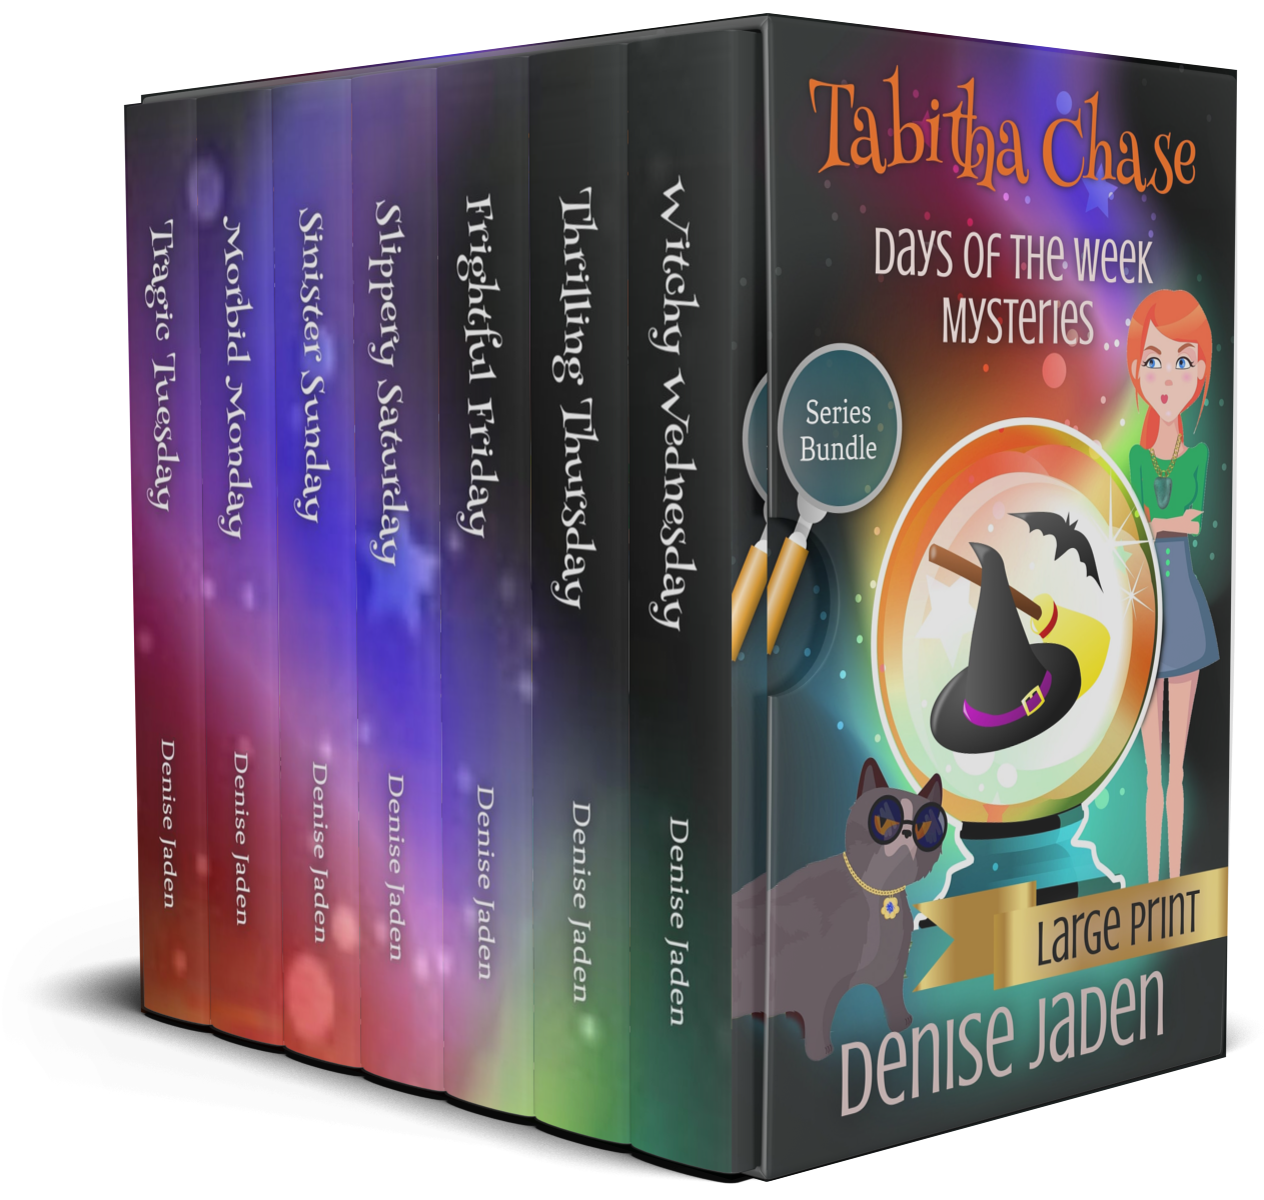 The Ultimate Paranormal Cozy Mystery Series -  Large Print Paperbacks - Books 1-7 ⭐⭐⭐⭐⭐ 4.6 (1450 ratings)